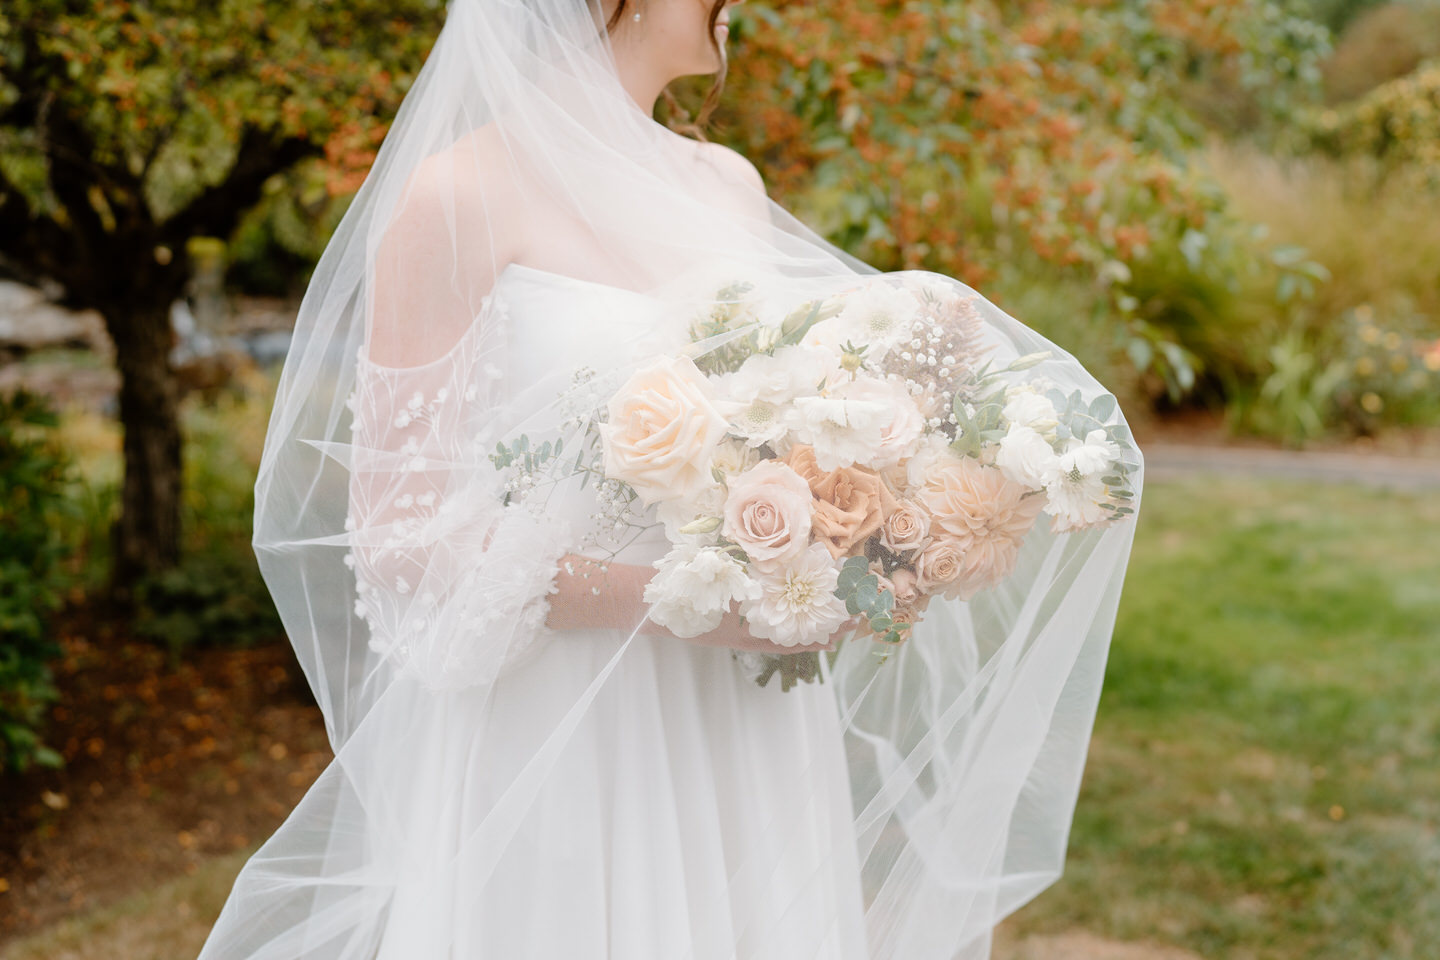 Veil covering bride and her bouquet. The bouquet is made of fall colors.